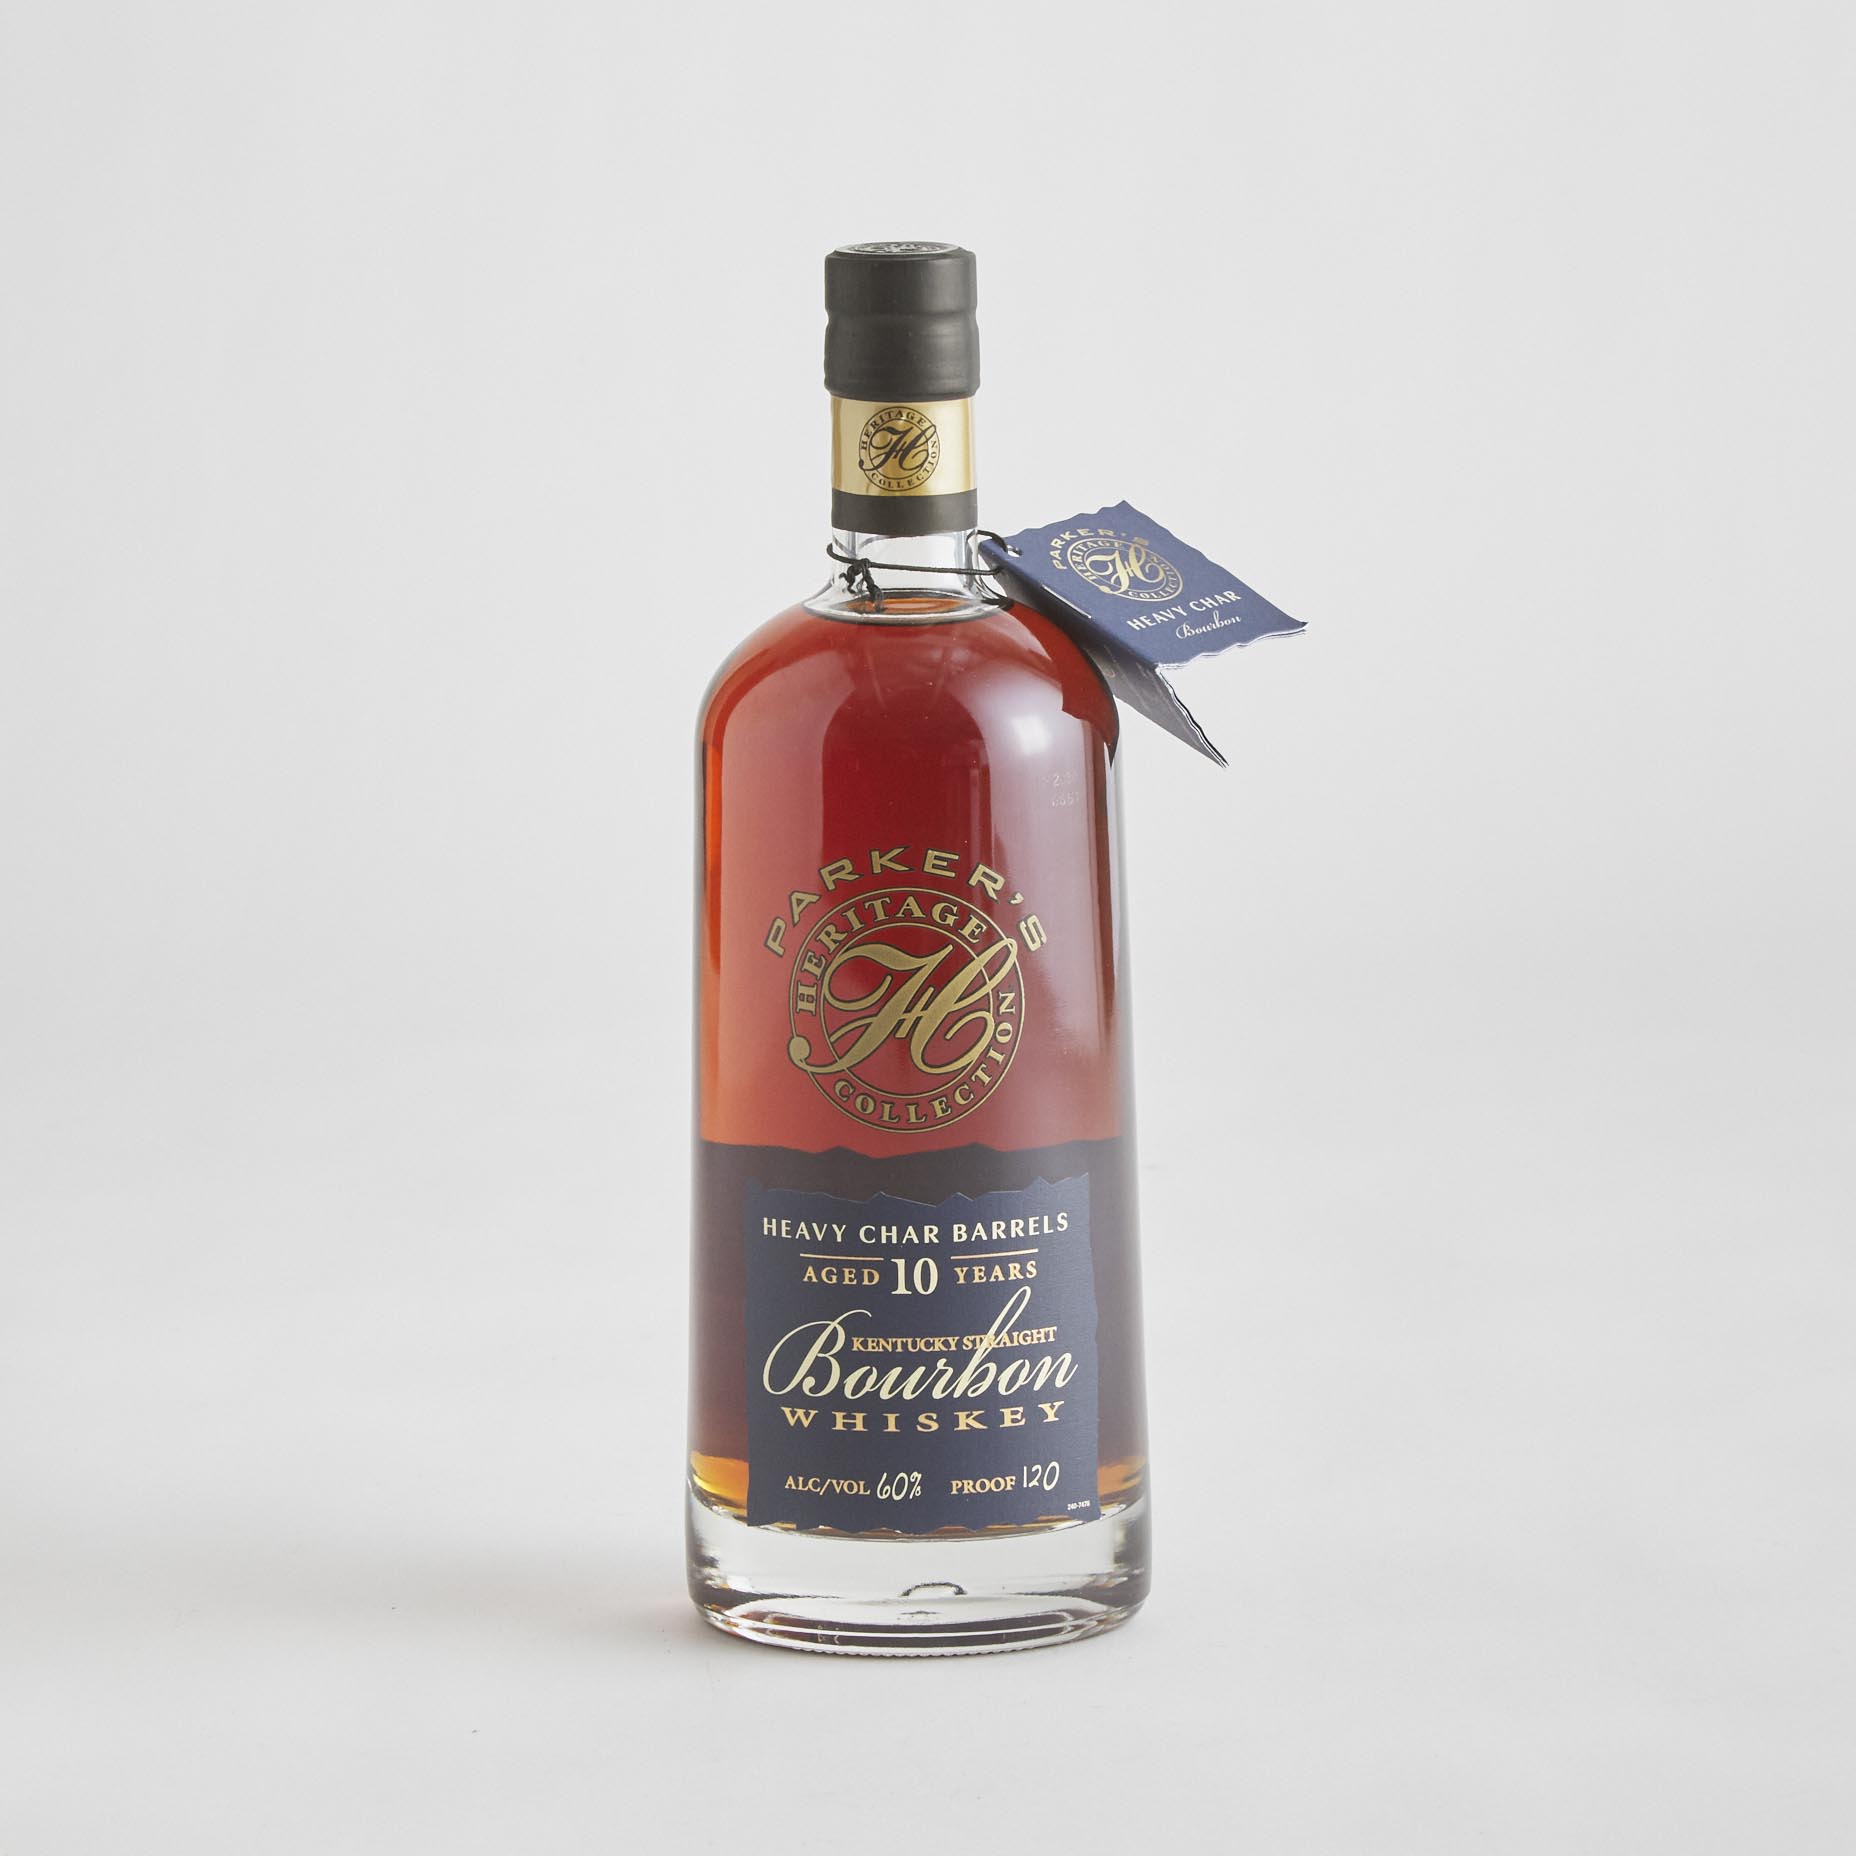 PARKER'S HERITAGE COLLECTION KENTUCKY STRAIGHT BOURBON WHISKY 10 YEARS (ONE 750 ML)